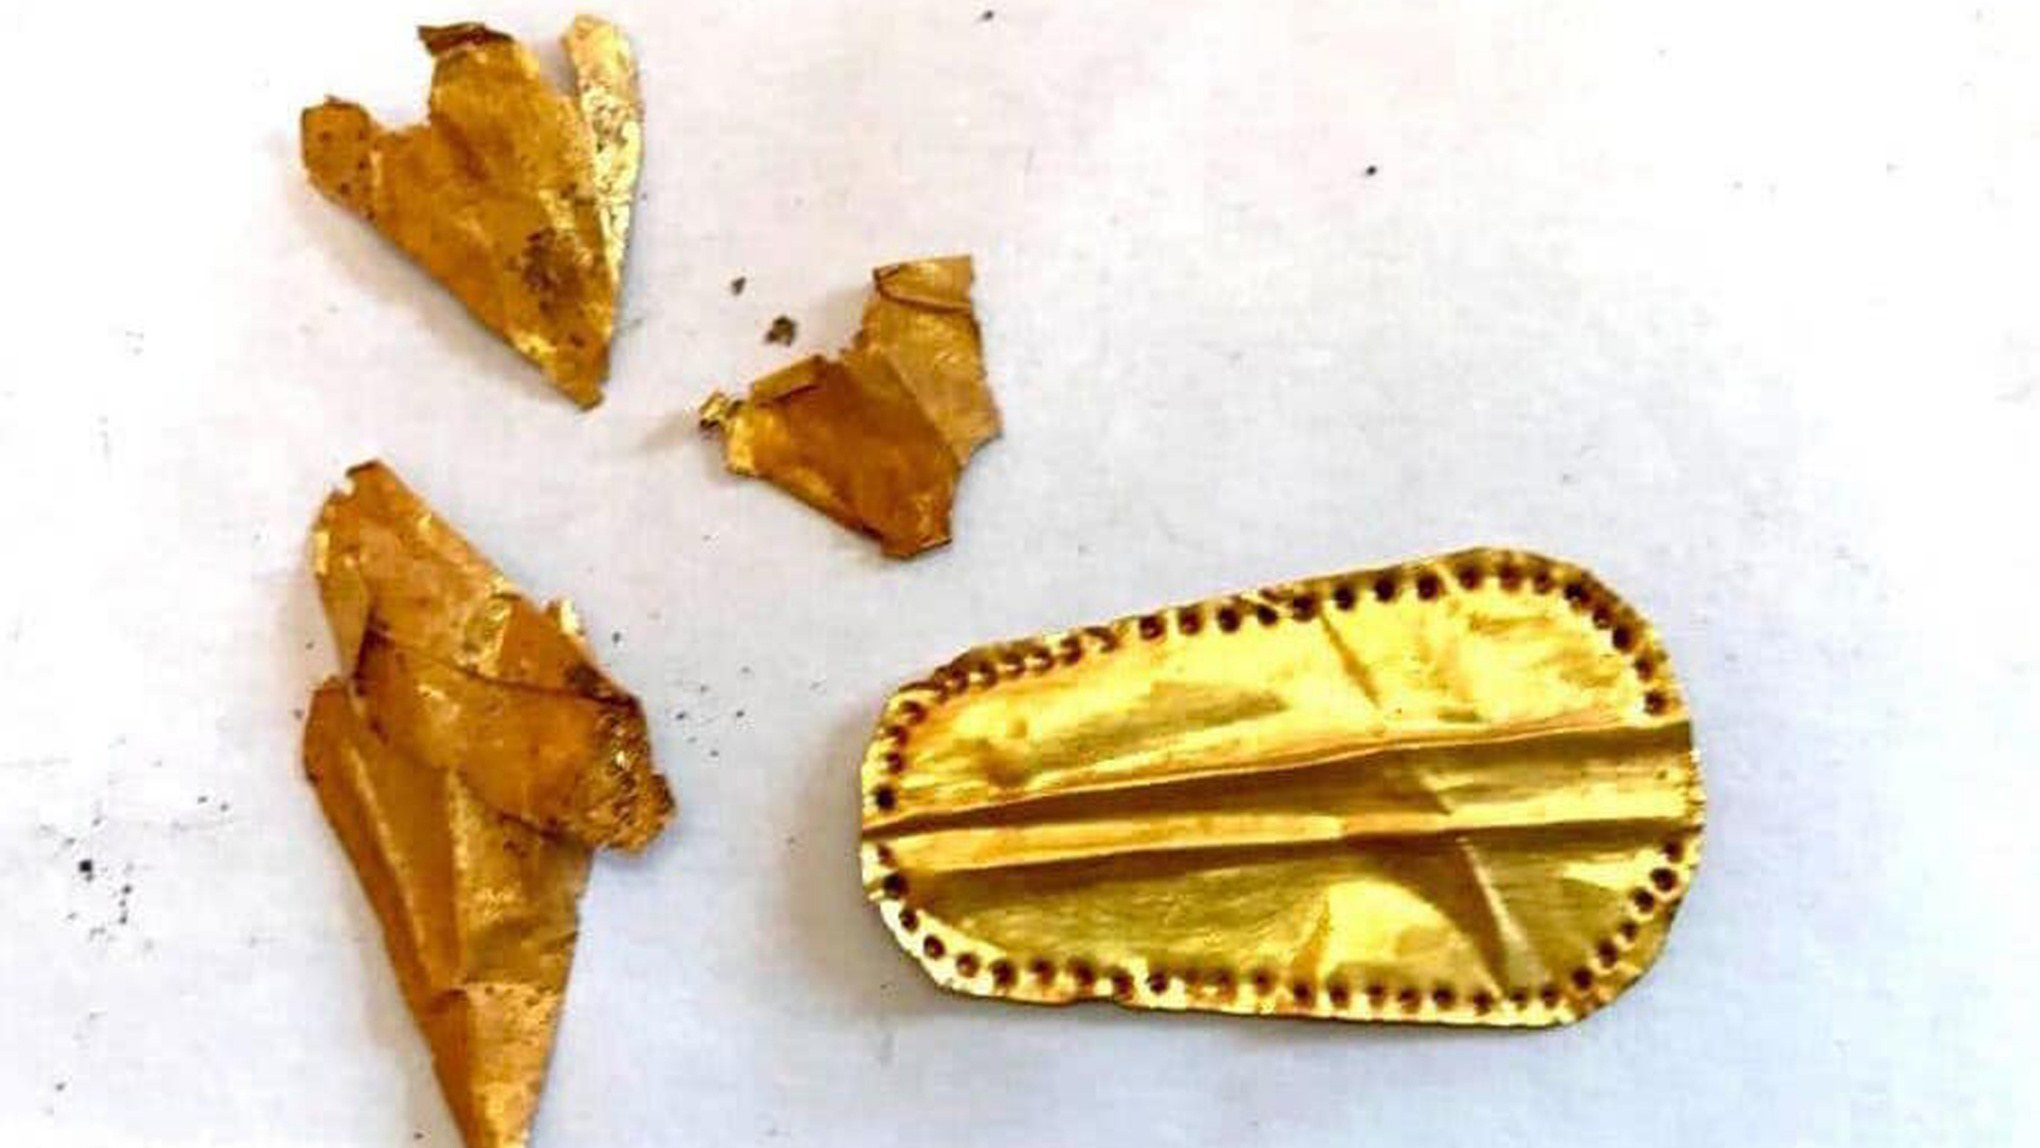 An annotated image shows the gold tongue discovered in the Qewaisna necropolis in Egypt.